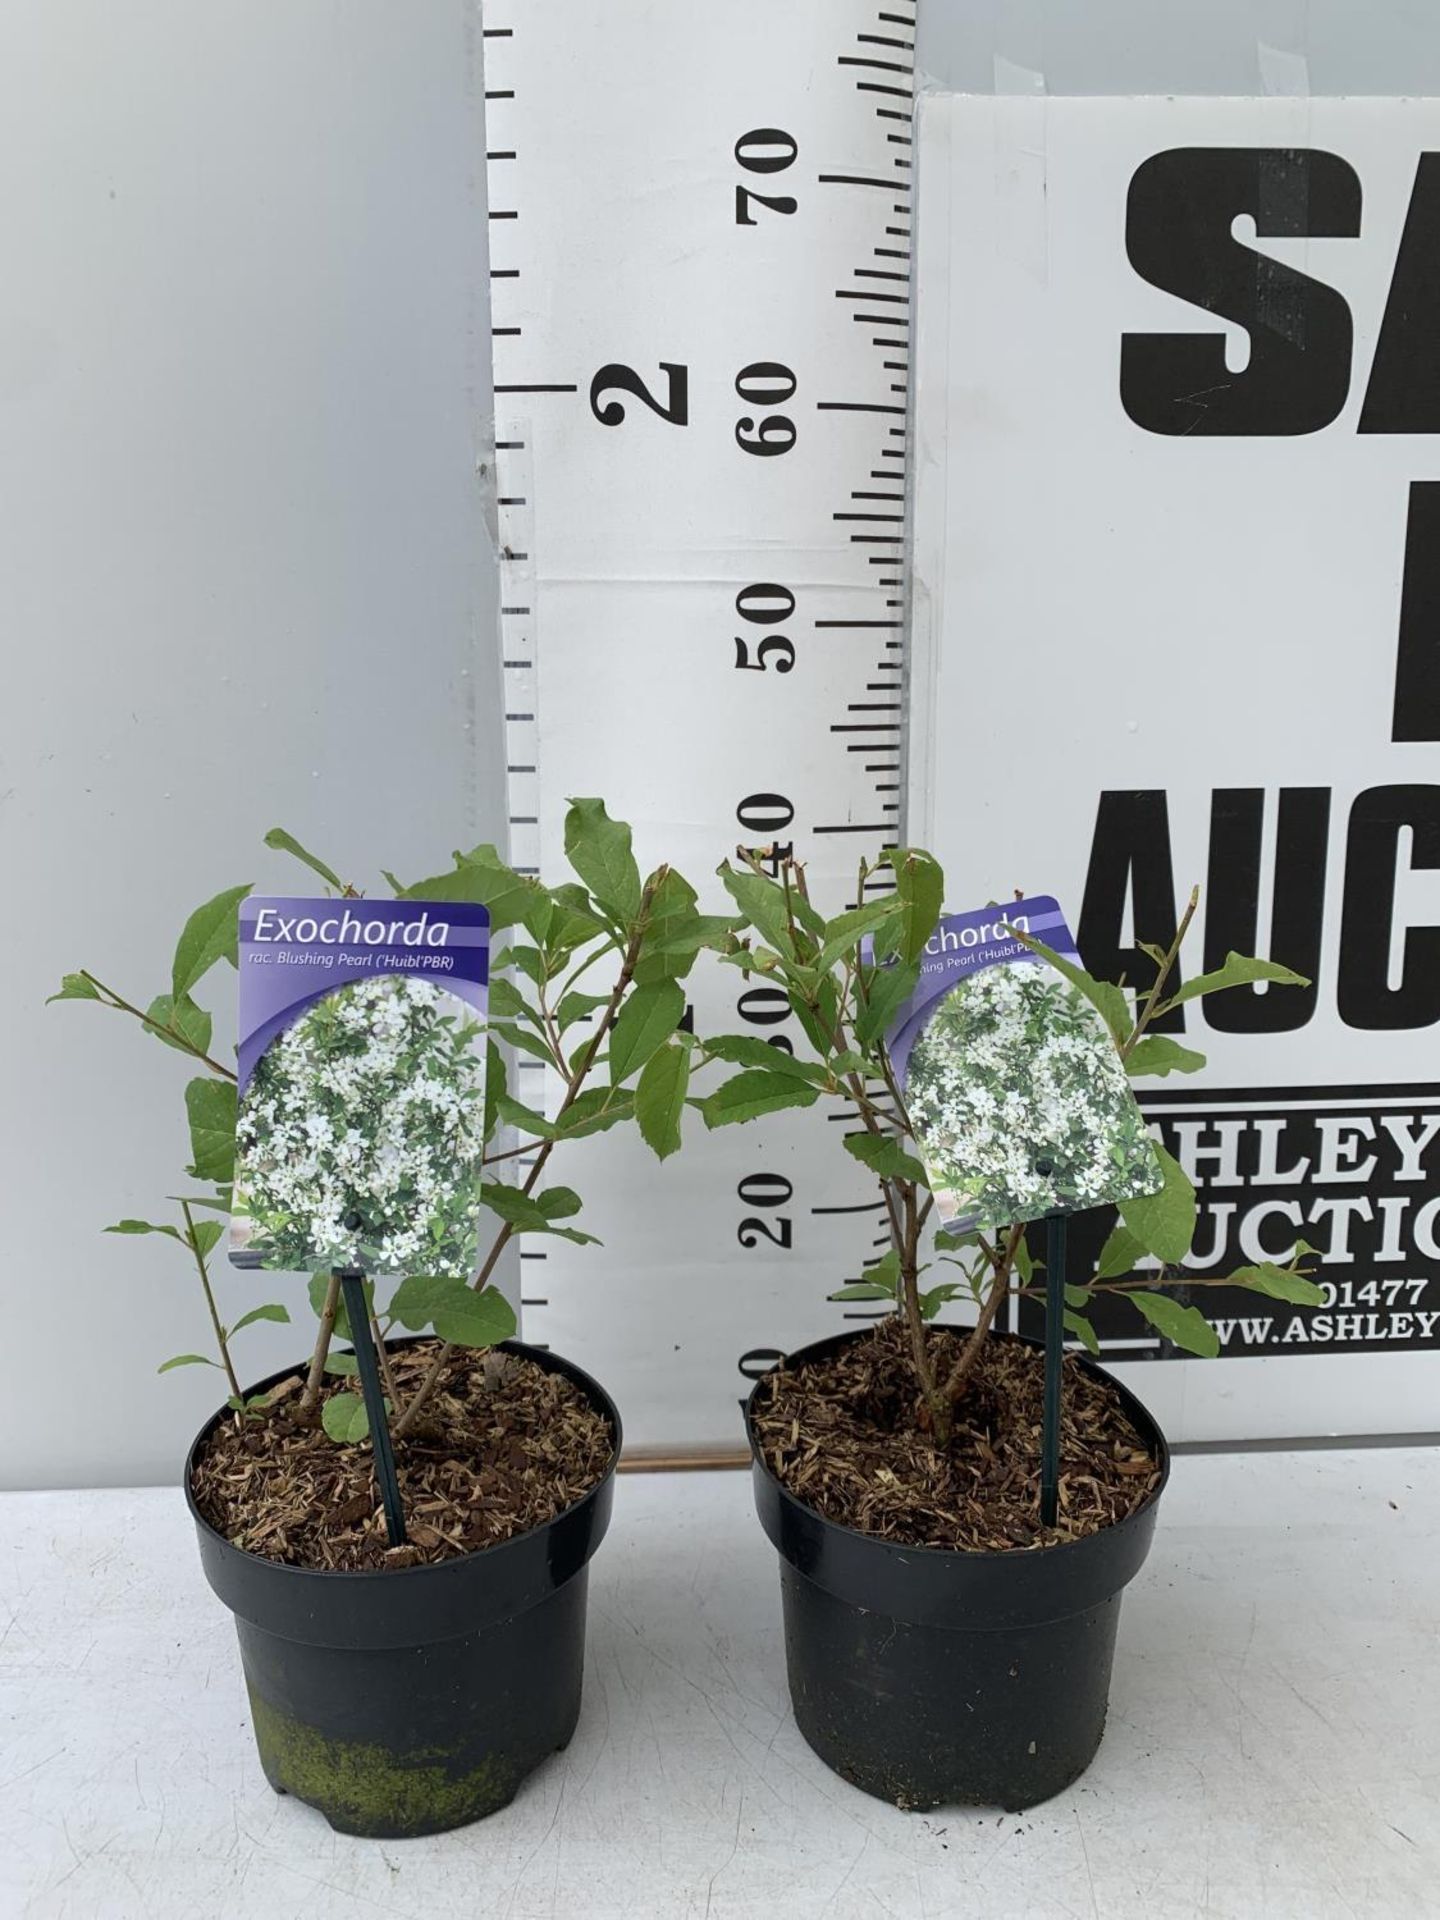 TWO EXOCHORDA BLUSHING PEARL IN 2 LTR POTS 40CM TALL PLUS VAT TO BE SOLD FOR THE TWO - Image 2 of 8